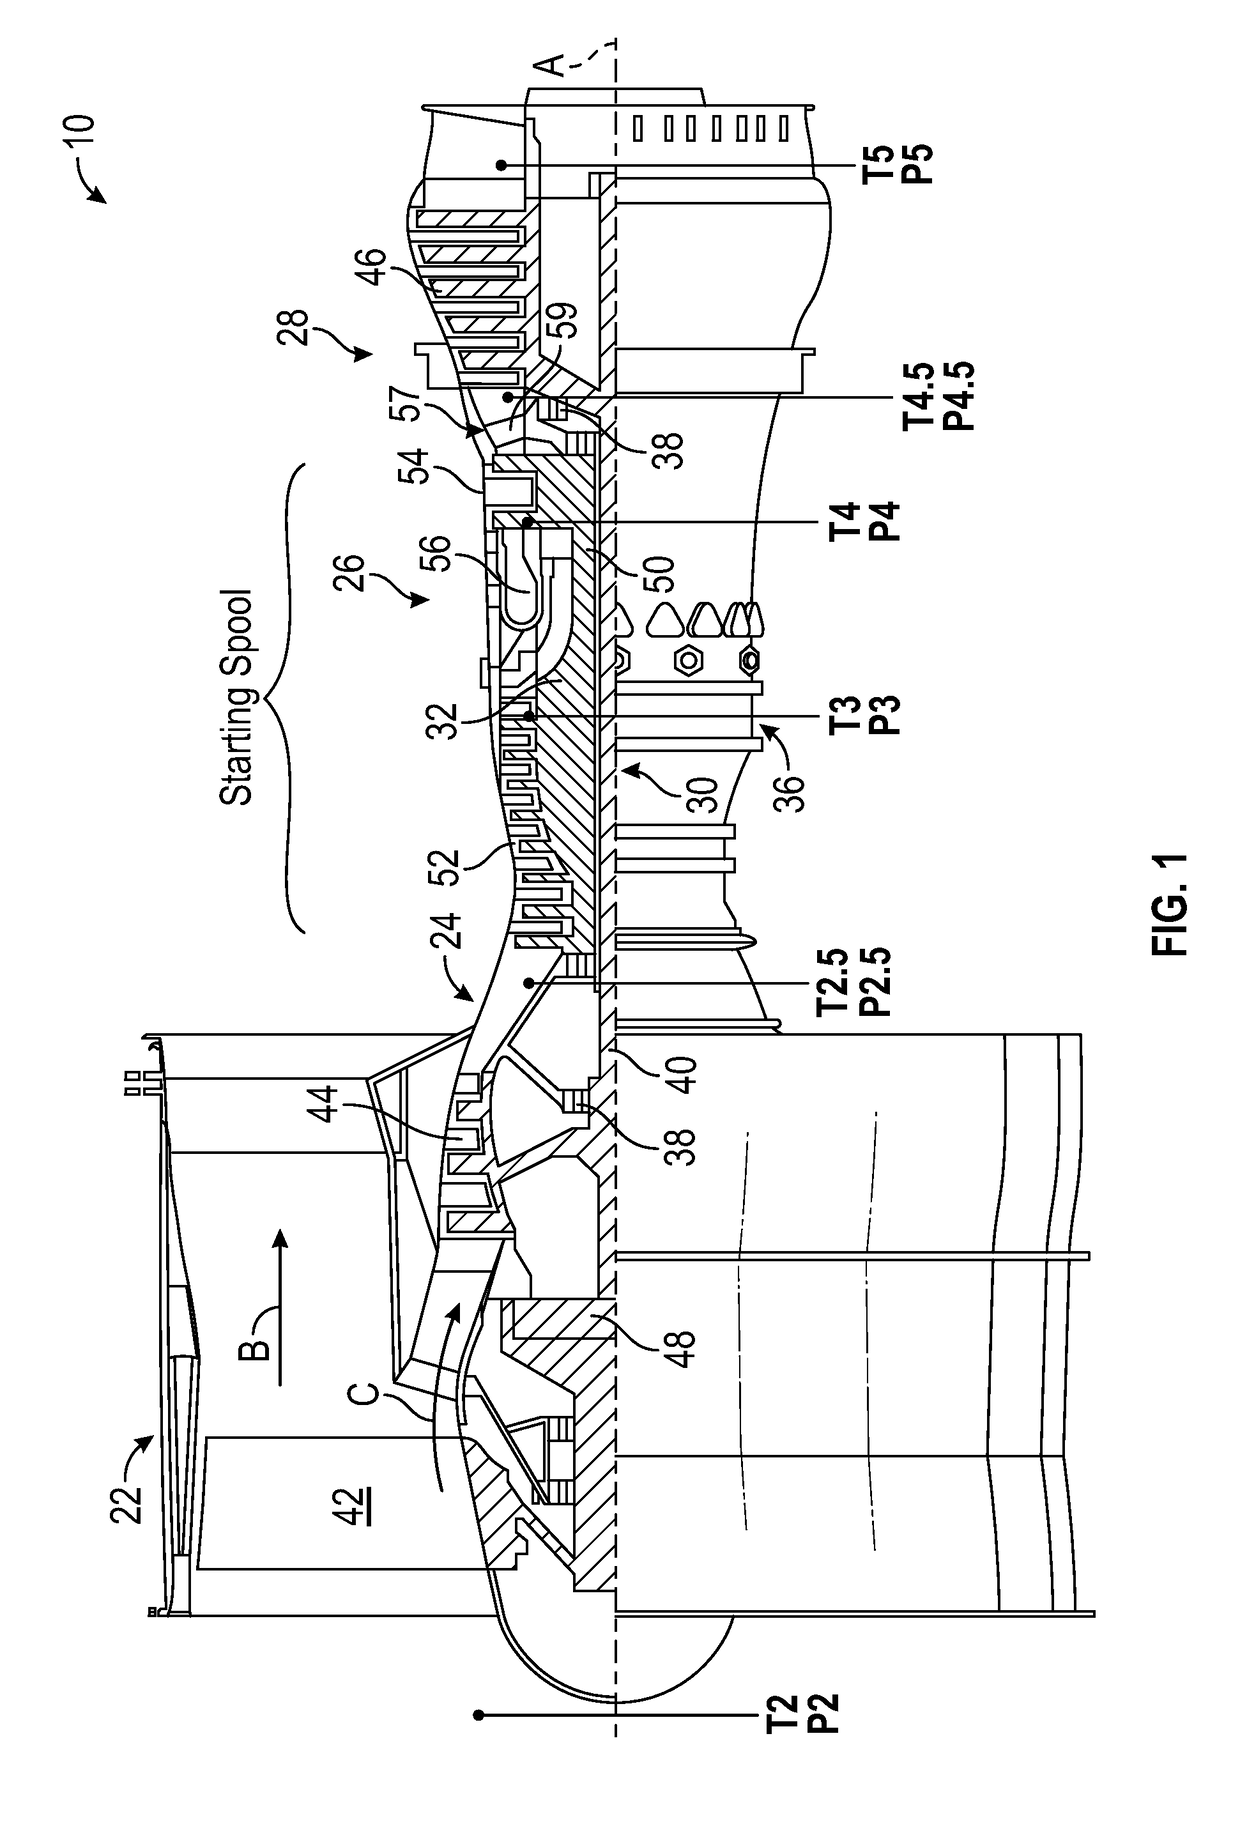 Modified start sequence of a gas turbine engine